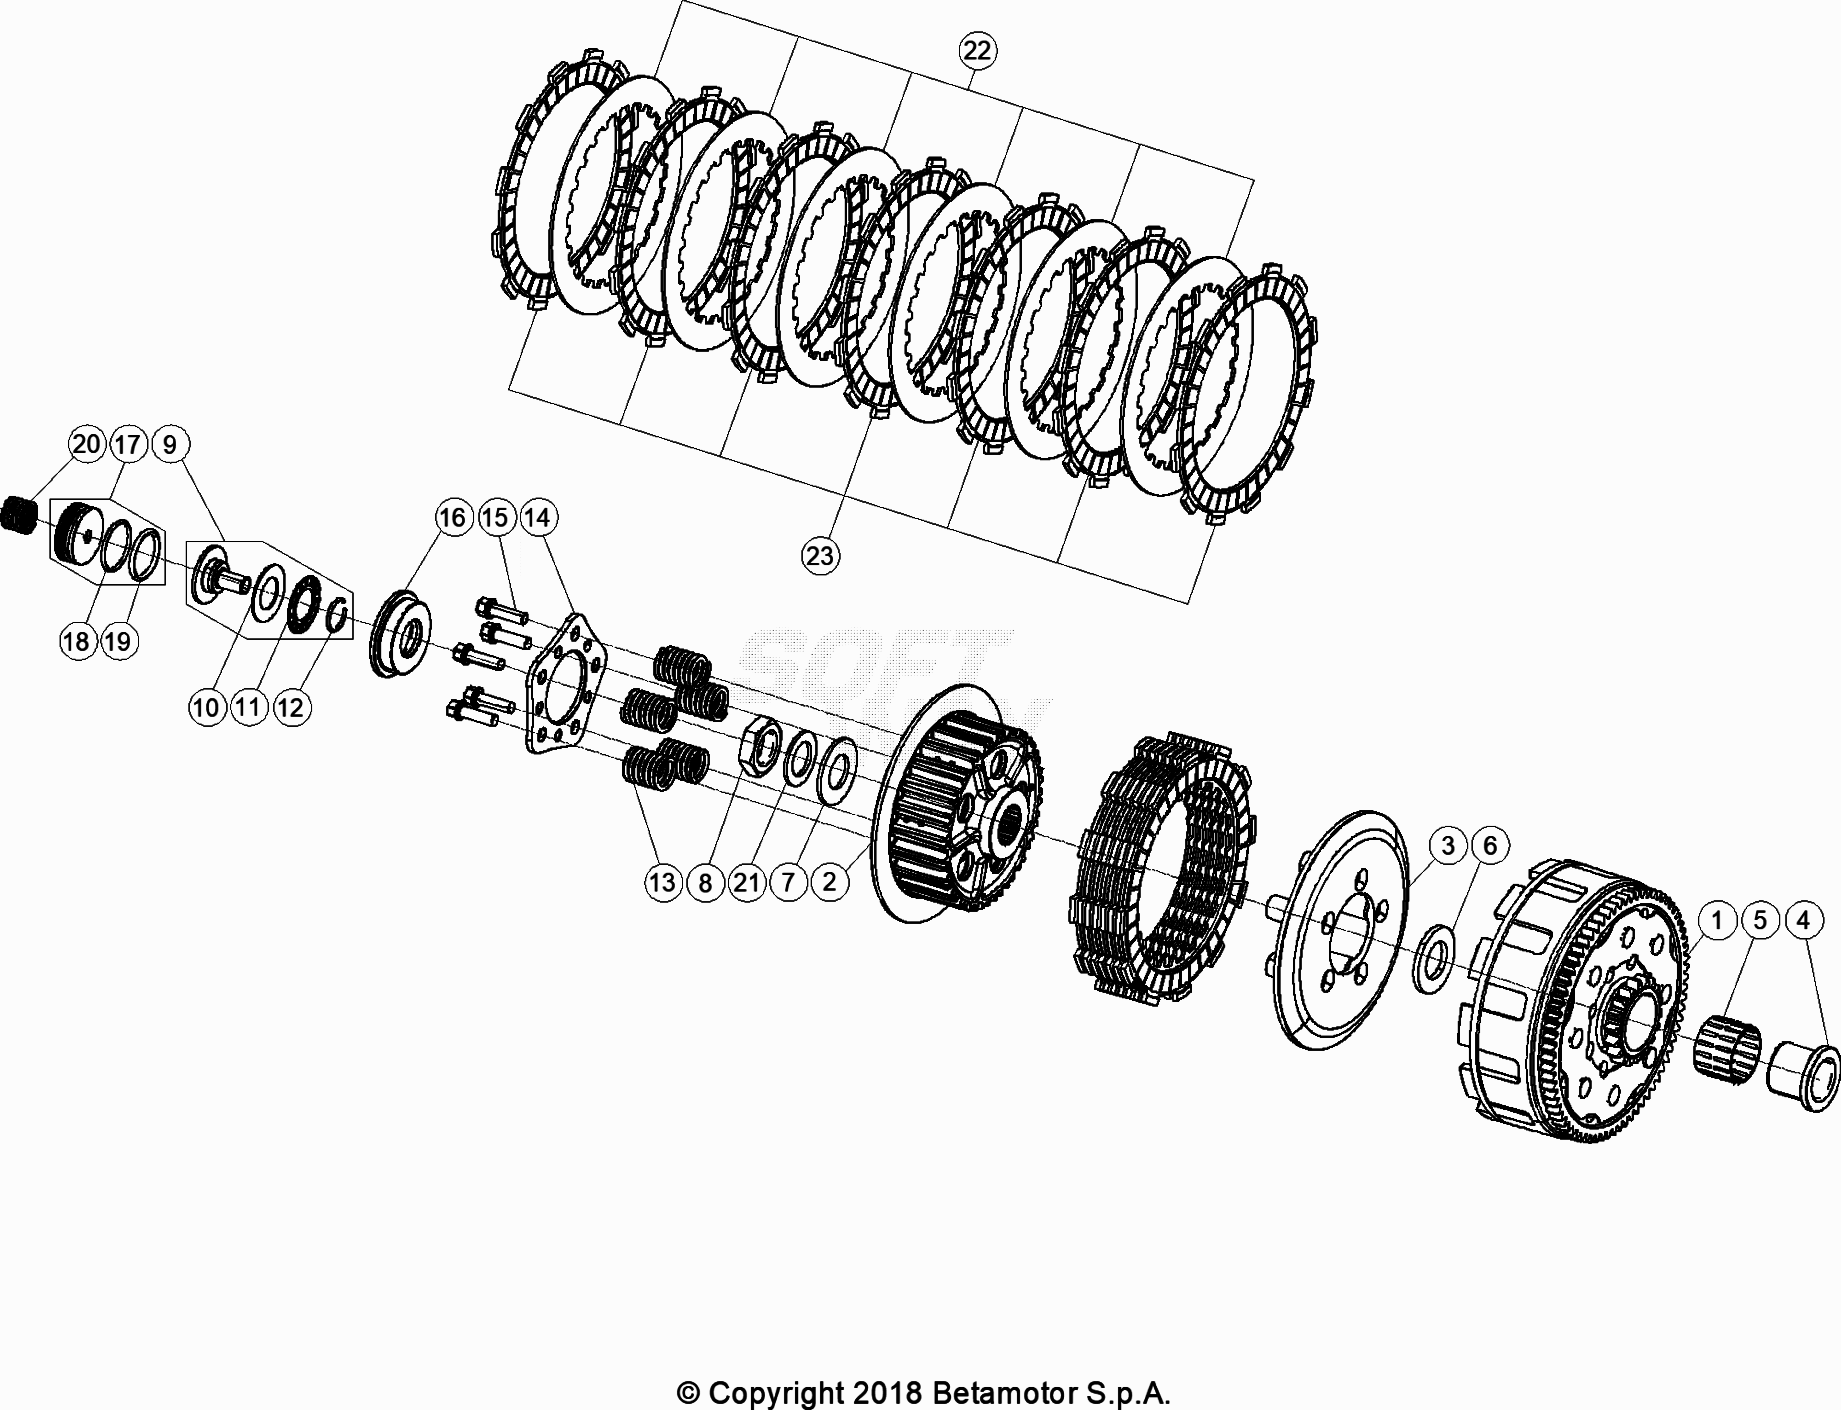 PRIMARY GEAR CPL CLUTCH